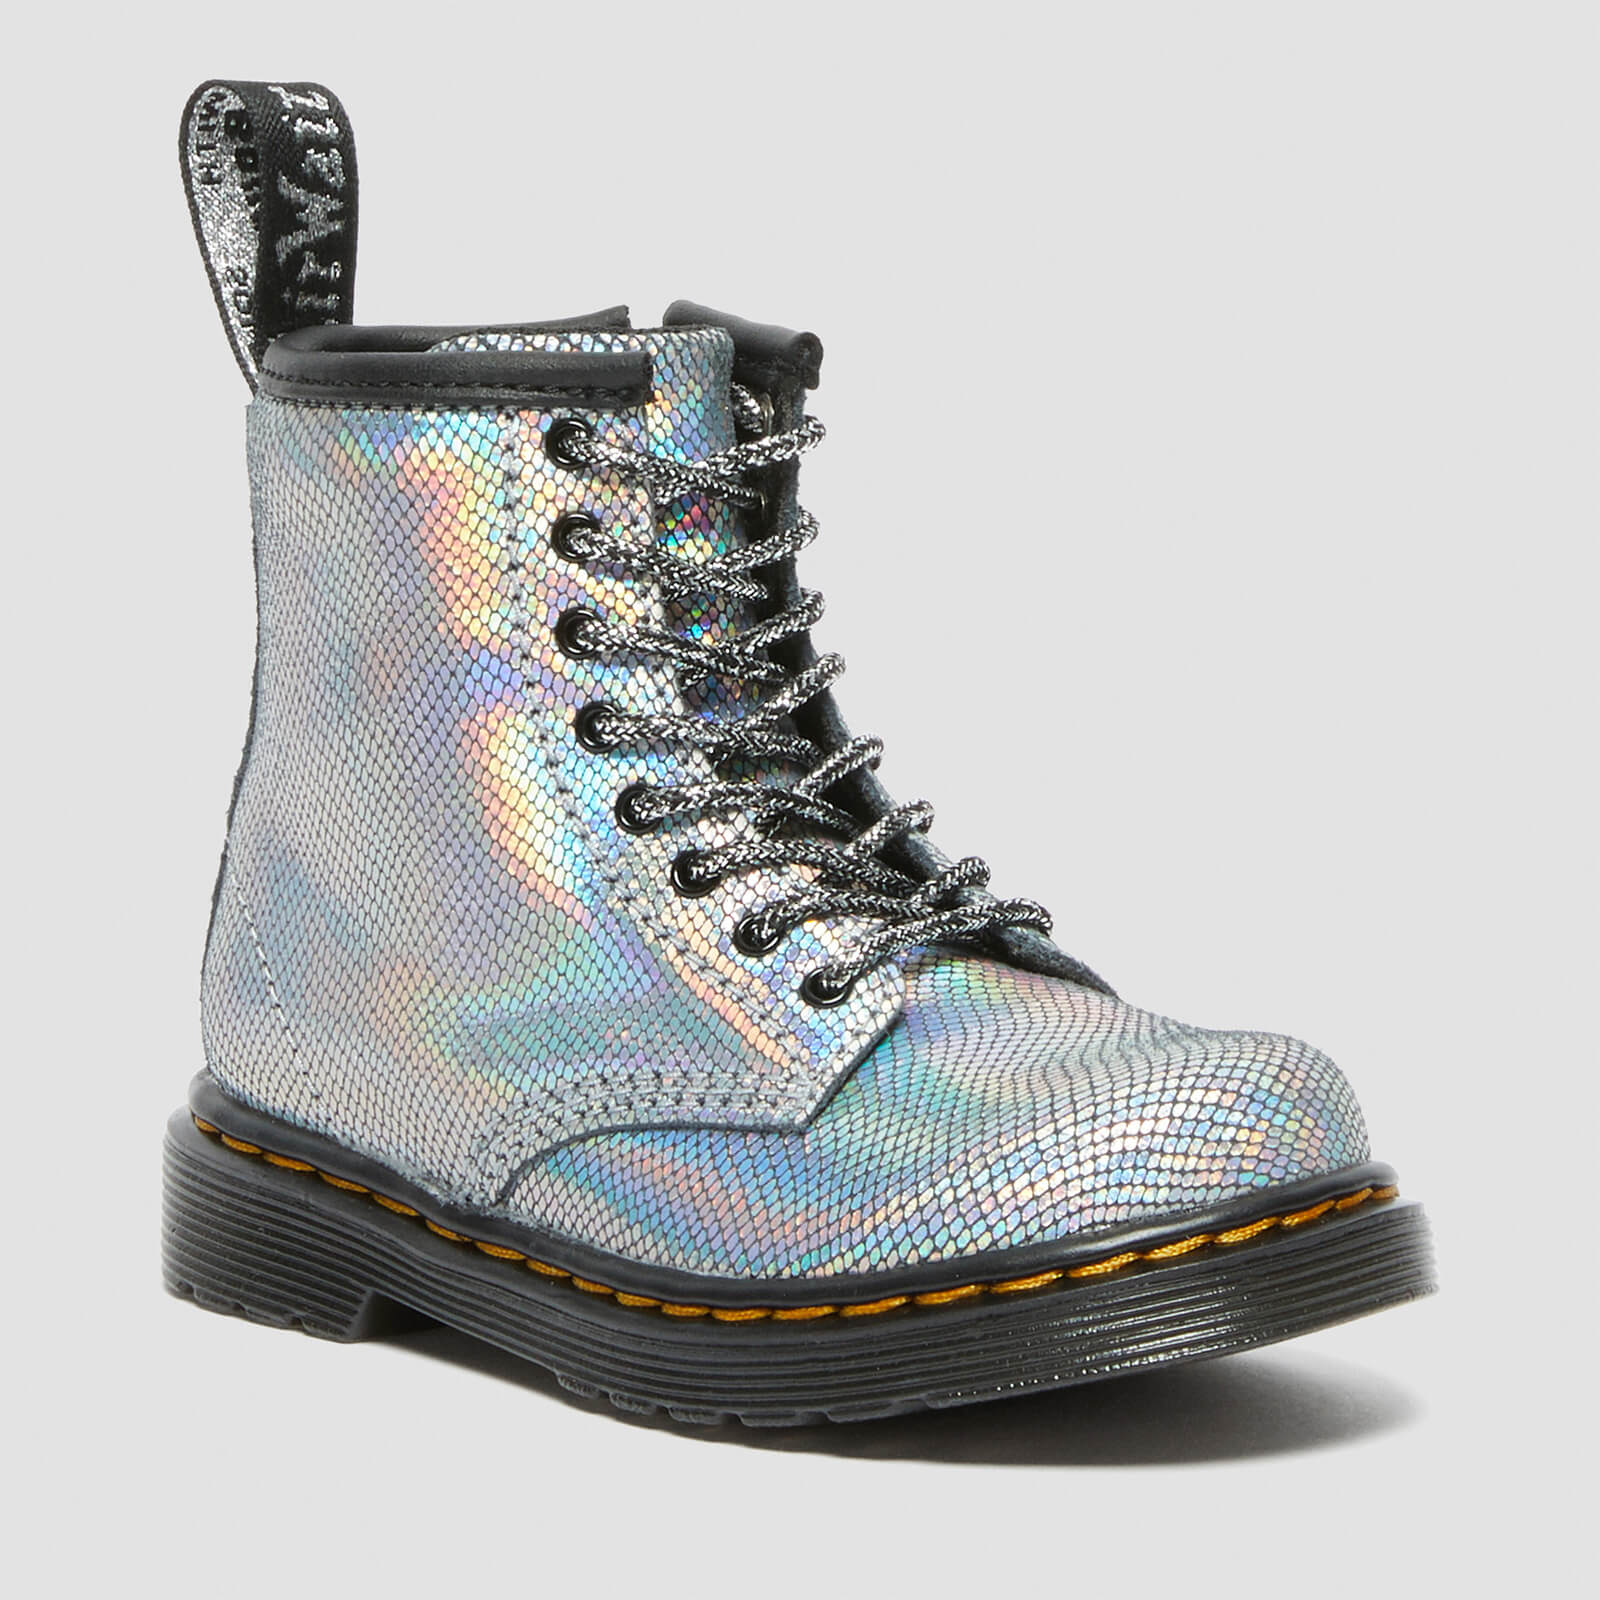 Dr. Martens Toddlers' 1460 T Iridescent Reptile Boots - Silver - UK 6 Toddler